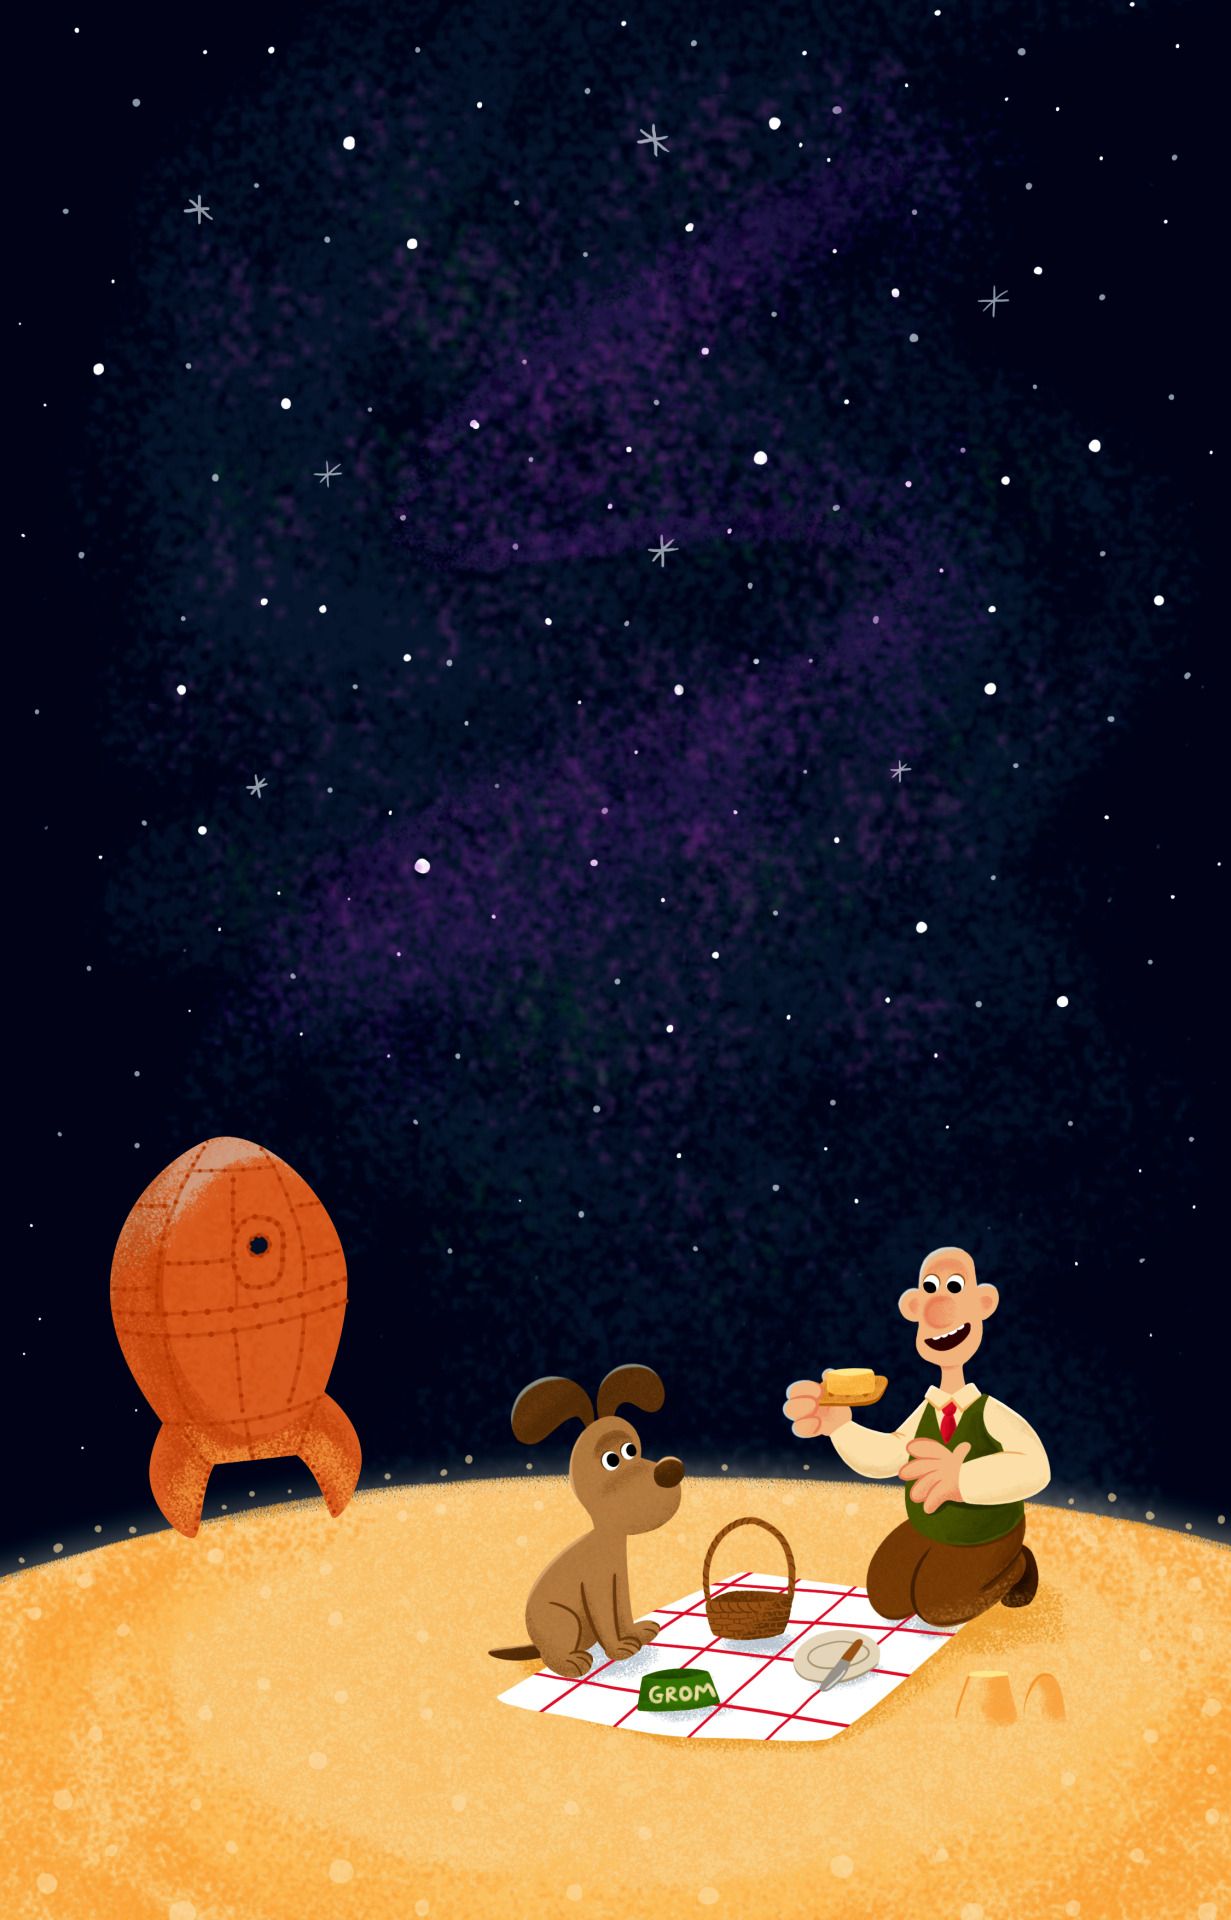 a Grand Day Out” Is My Favorite Wallace And Gromit And Gromit iPhone Wallpaper & Background Download